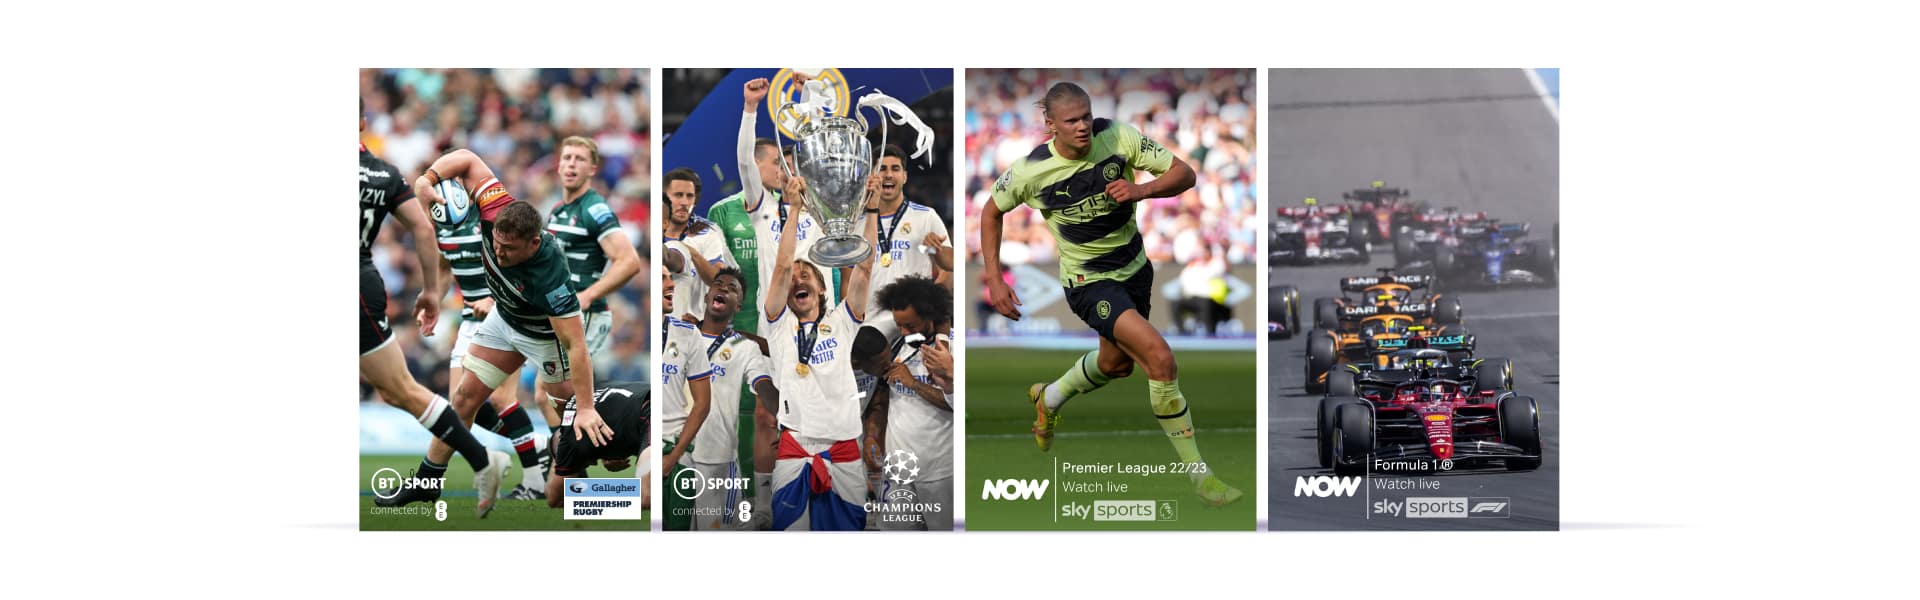 Our sports coverage includes the UEFA Champions League, Premiership Rugby, UFC, WWE and more